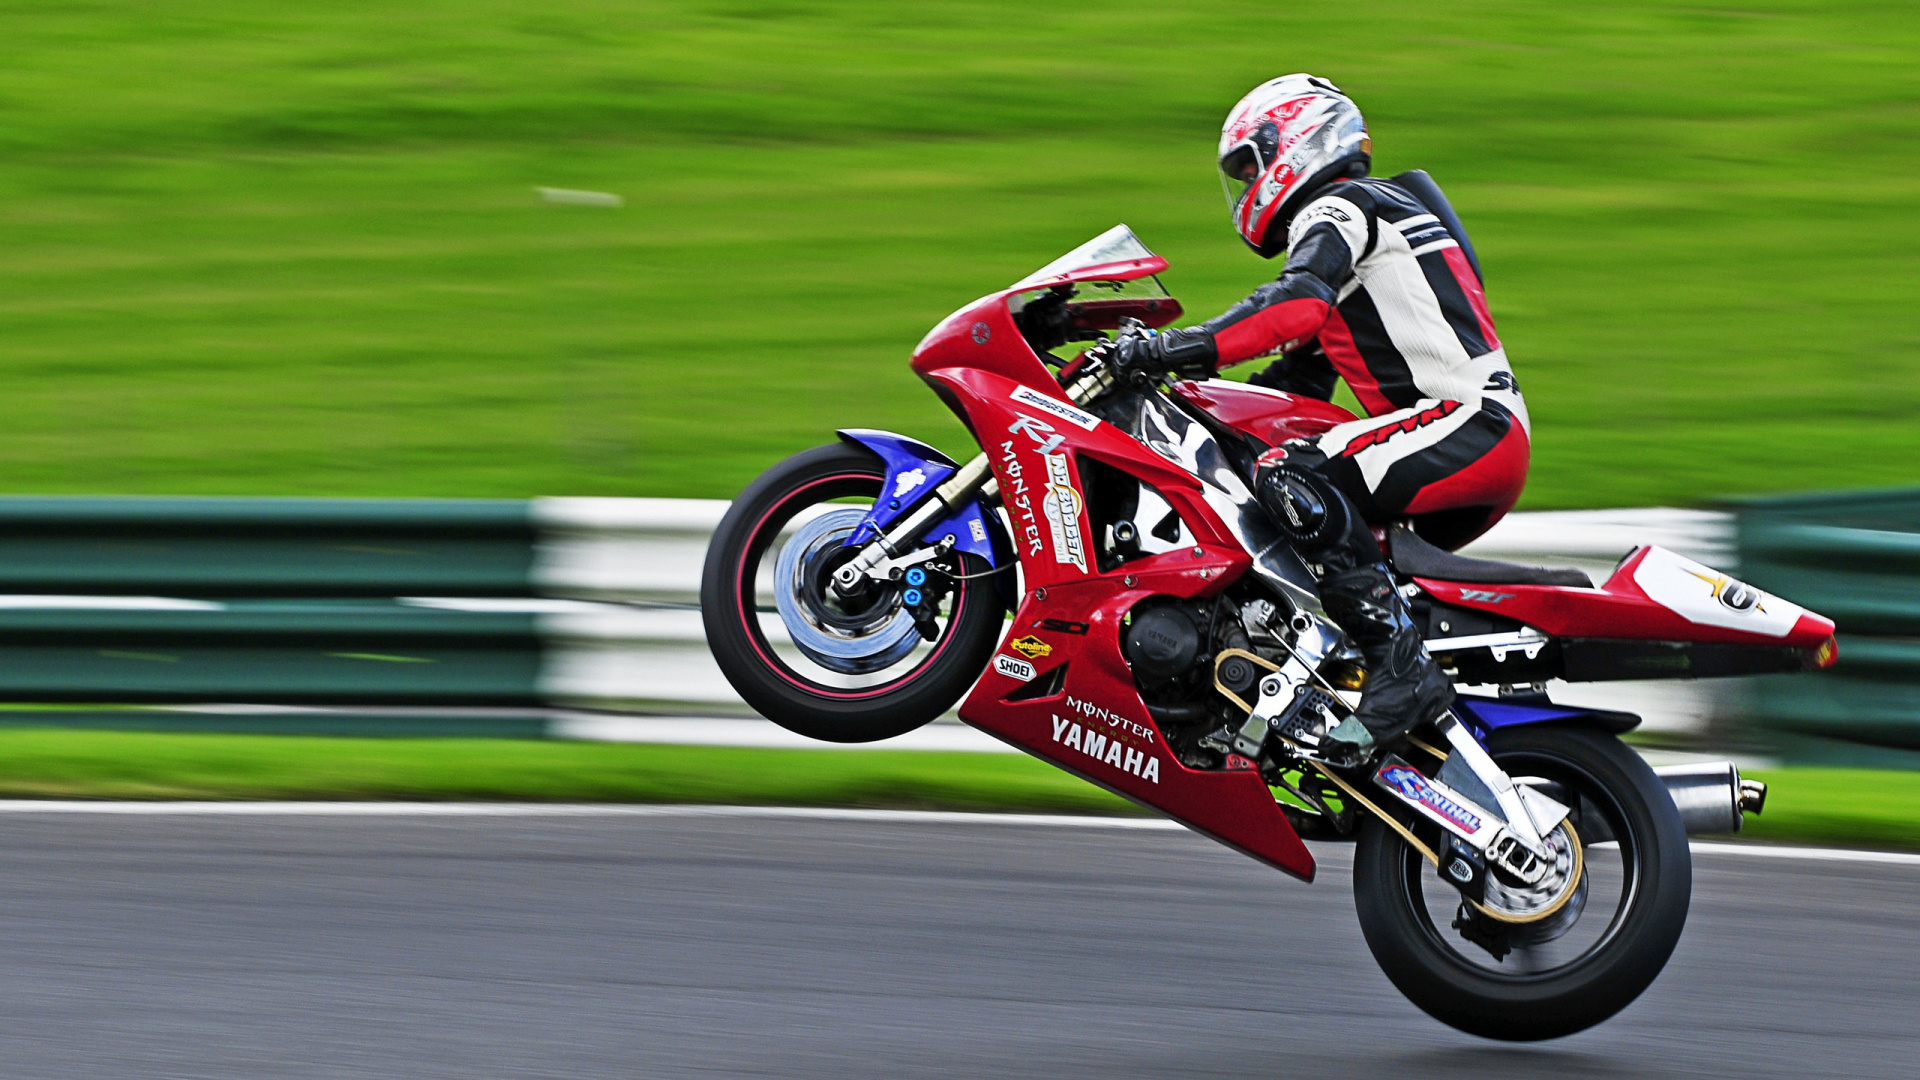 Man in Red and Black Motorcycle Suit Riding on Red Sports Bike. Wallpaper in 1920x1080 Resolution